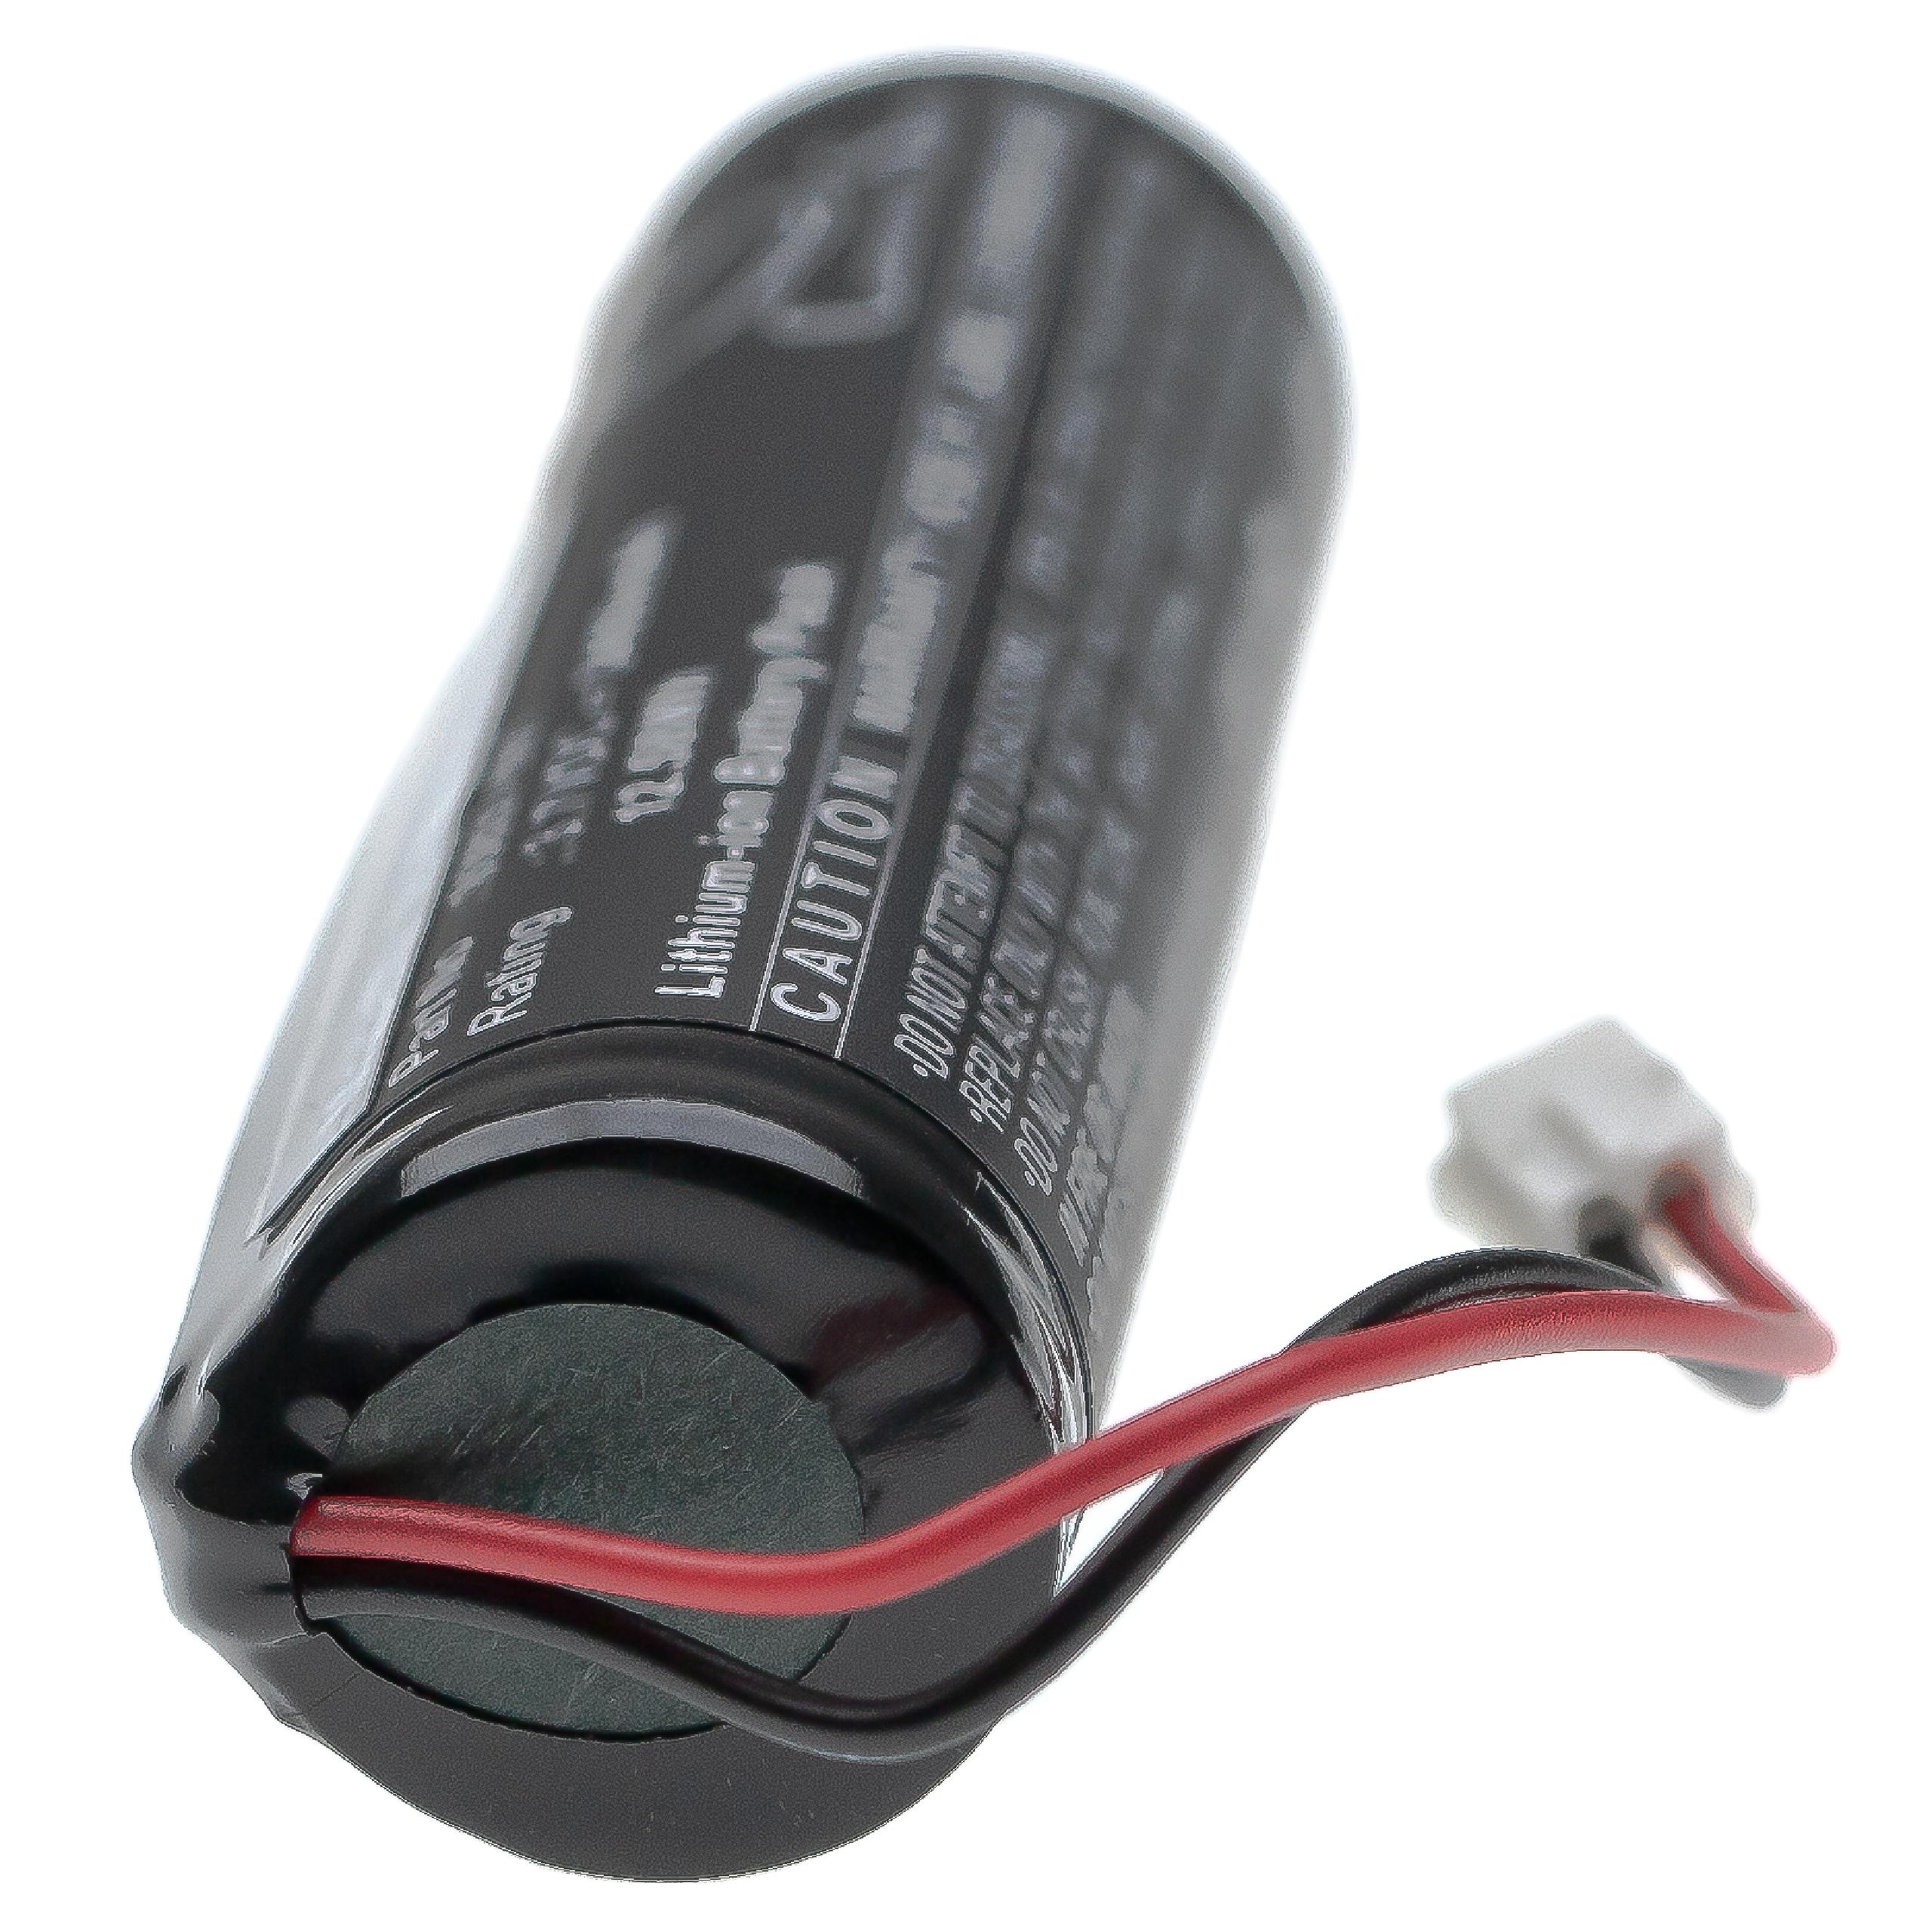 Electric Razor Battery Replacement for Wahl 93837-001, 93837-200 - 3400mAh 3.7V Li-Ion